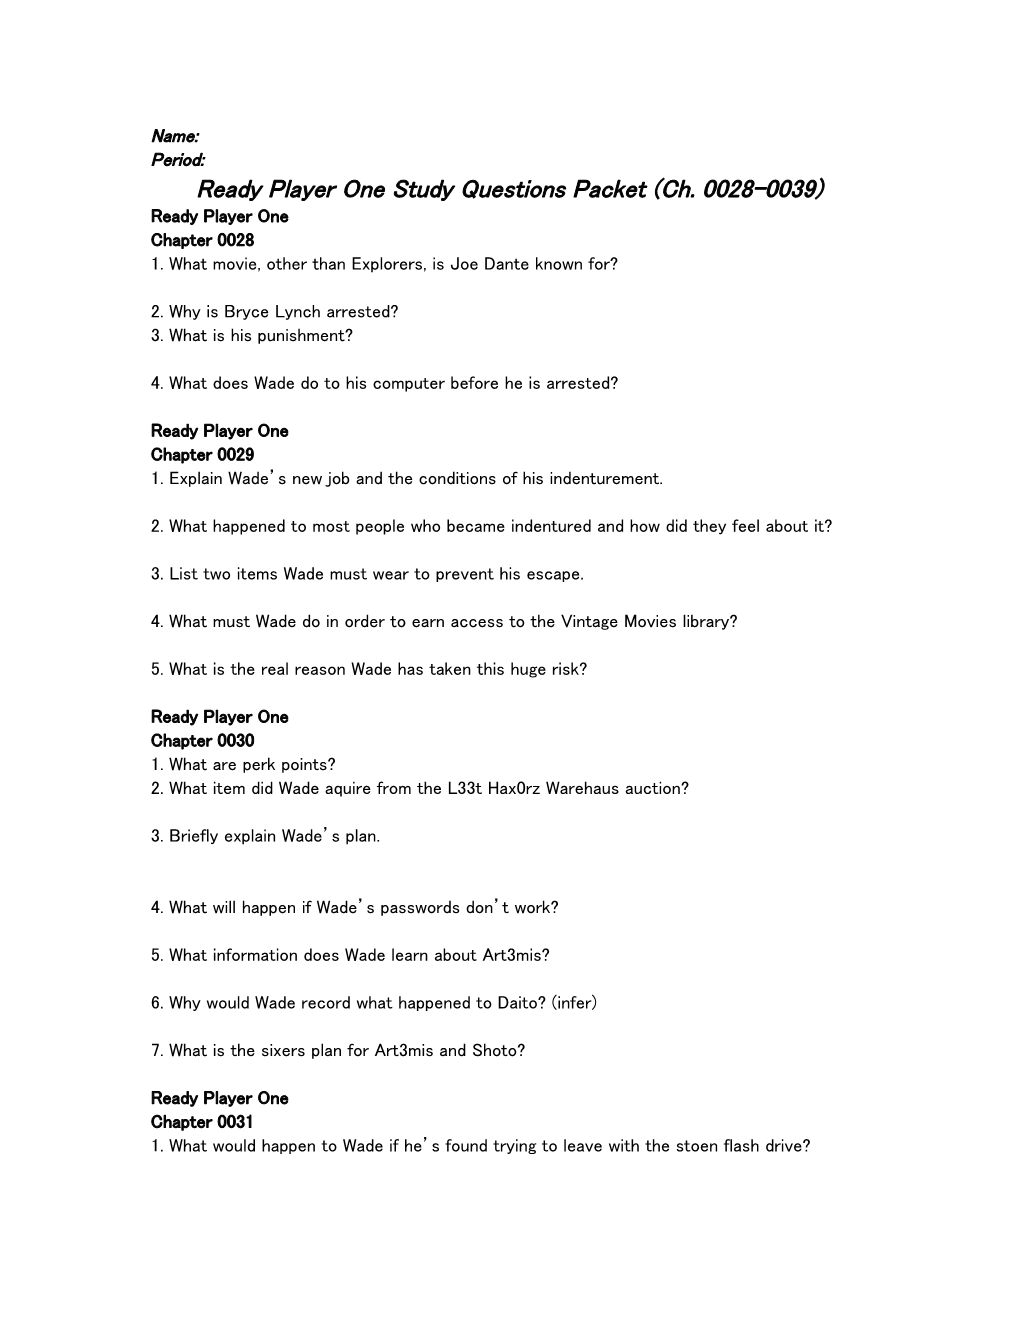 Ready Player One Study Questions Packet (Ch. 0028-0039)